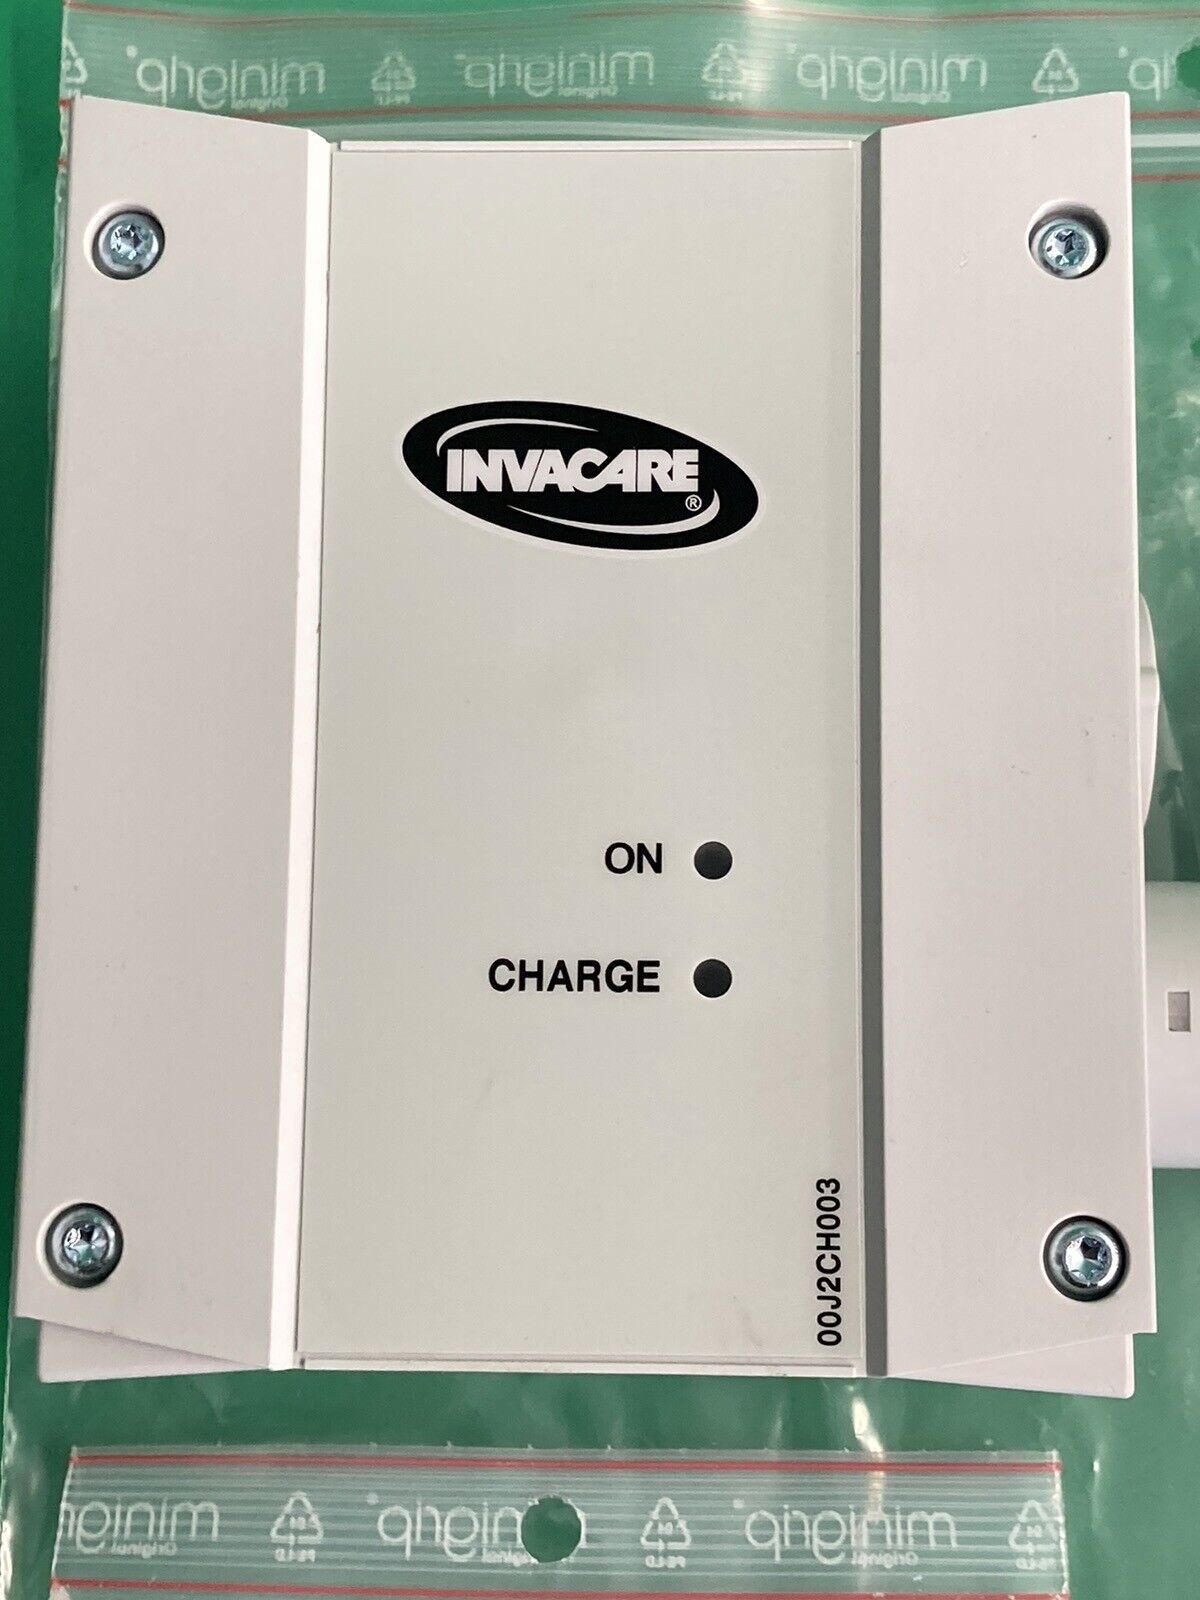 NEW* Invacare Detachable Wall Battery Charger for Patient Lifts CHJ2006-00 #J417